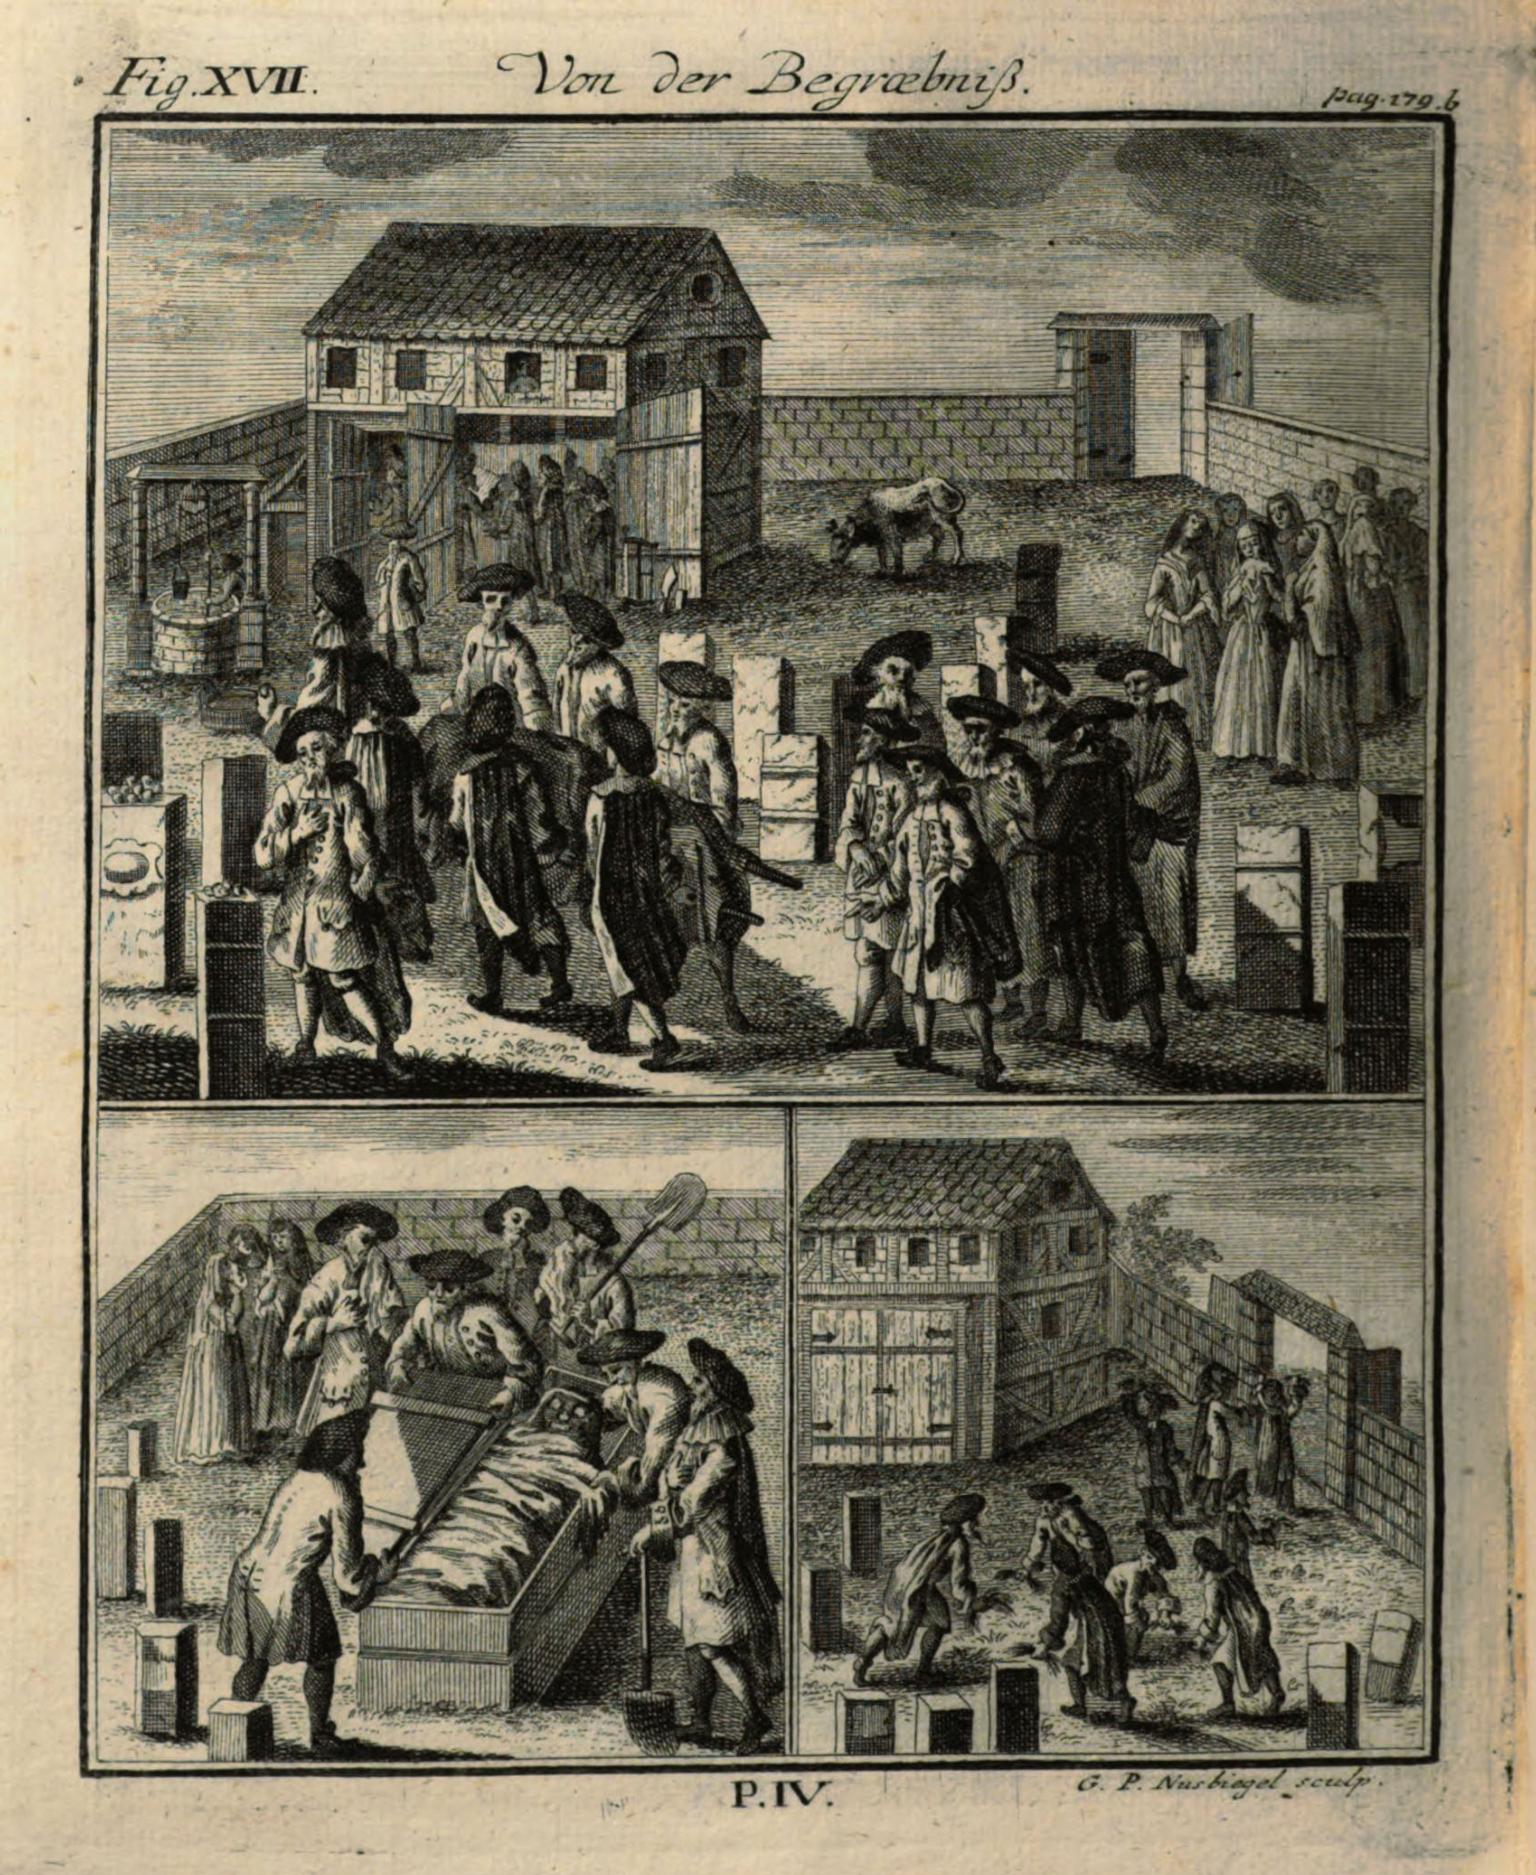 Print image in three panels: the top panel shows groups of men and women in courtyard outside of building, the bottom left panel shows people around body in coffin, and the bottom right panel shows people outside building. 